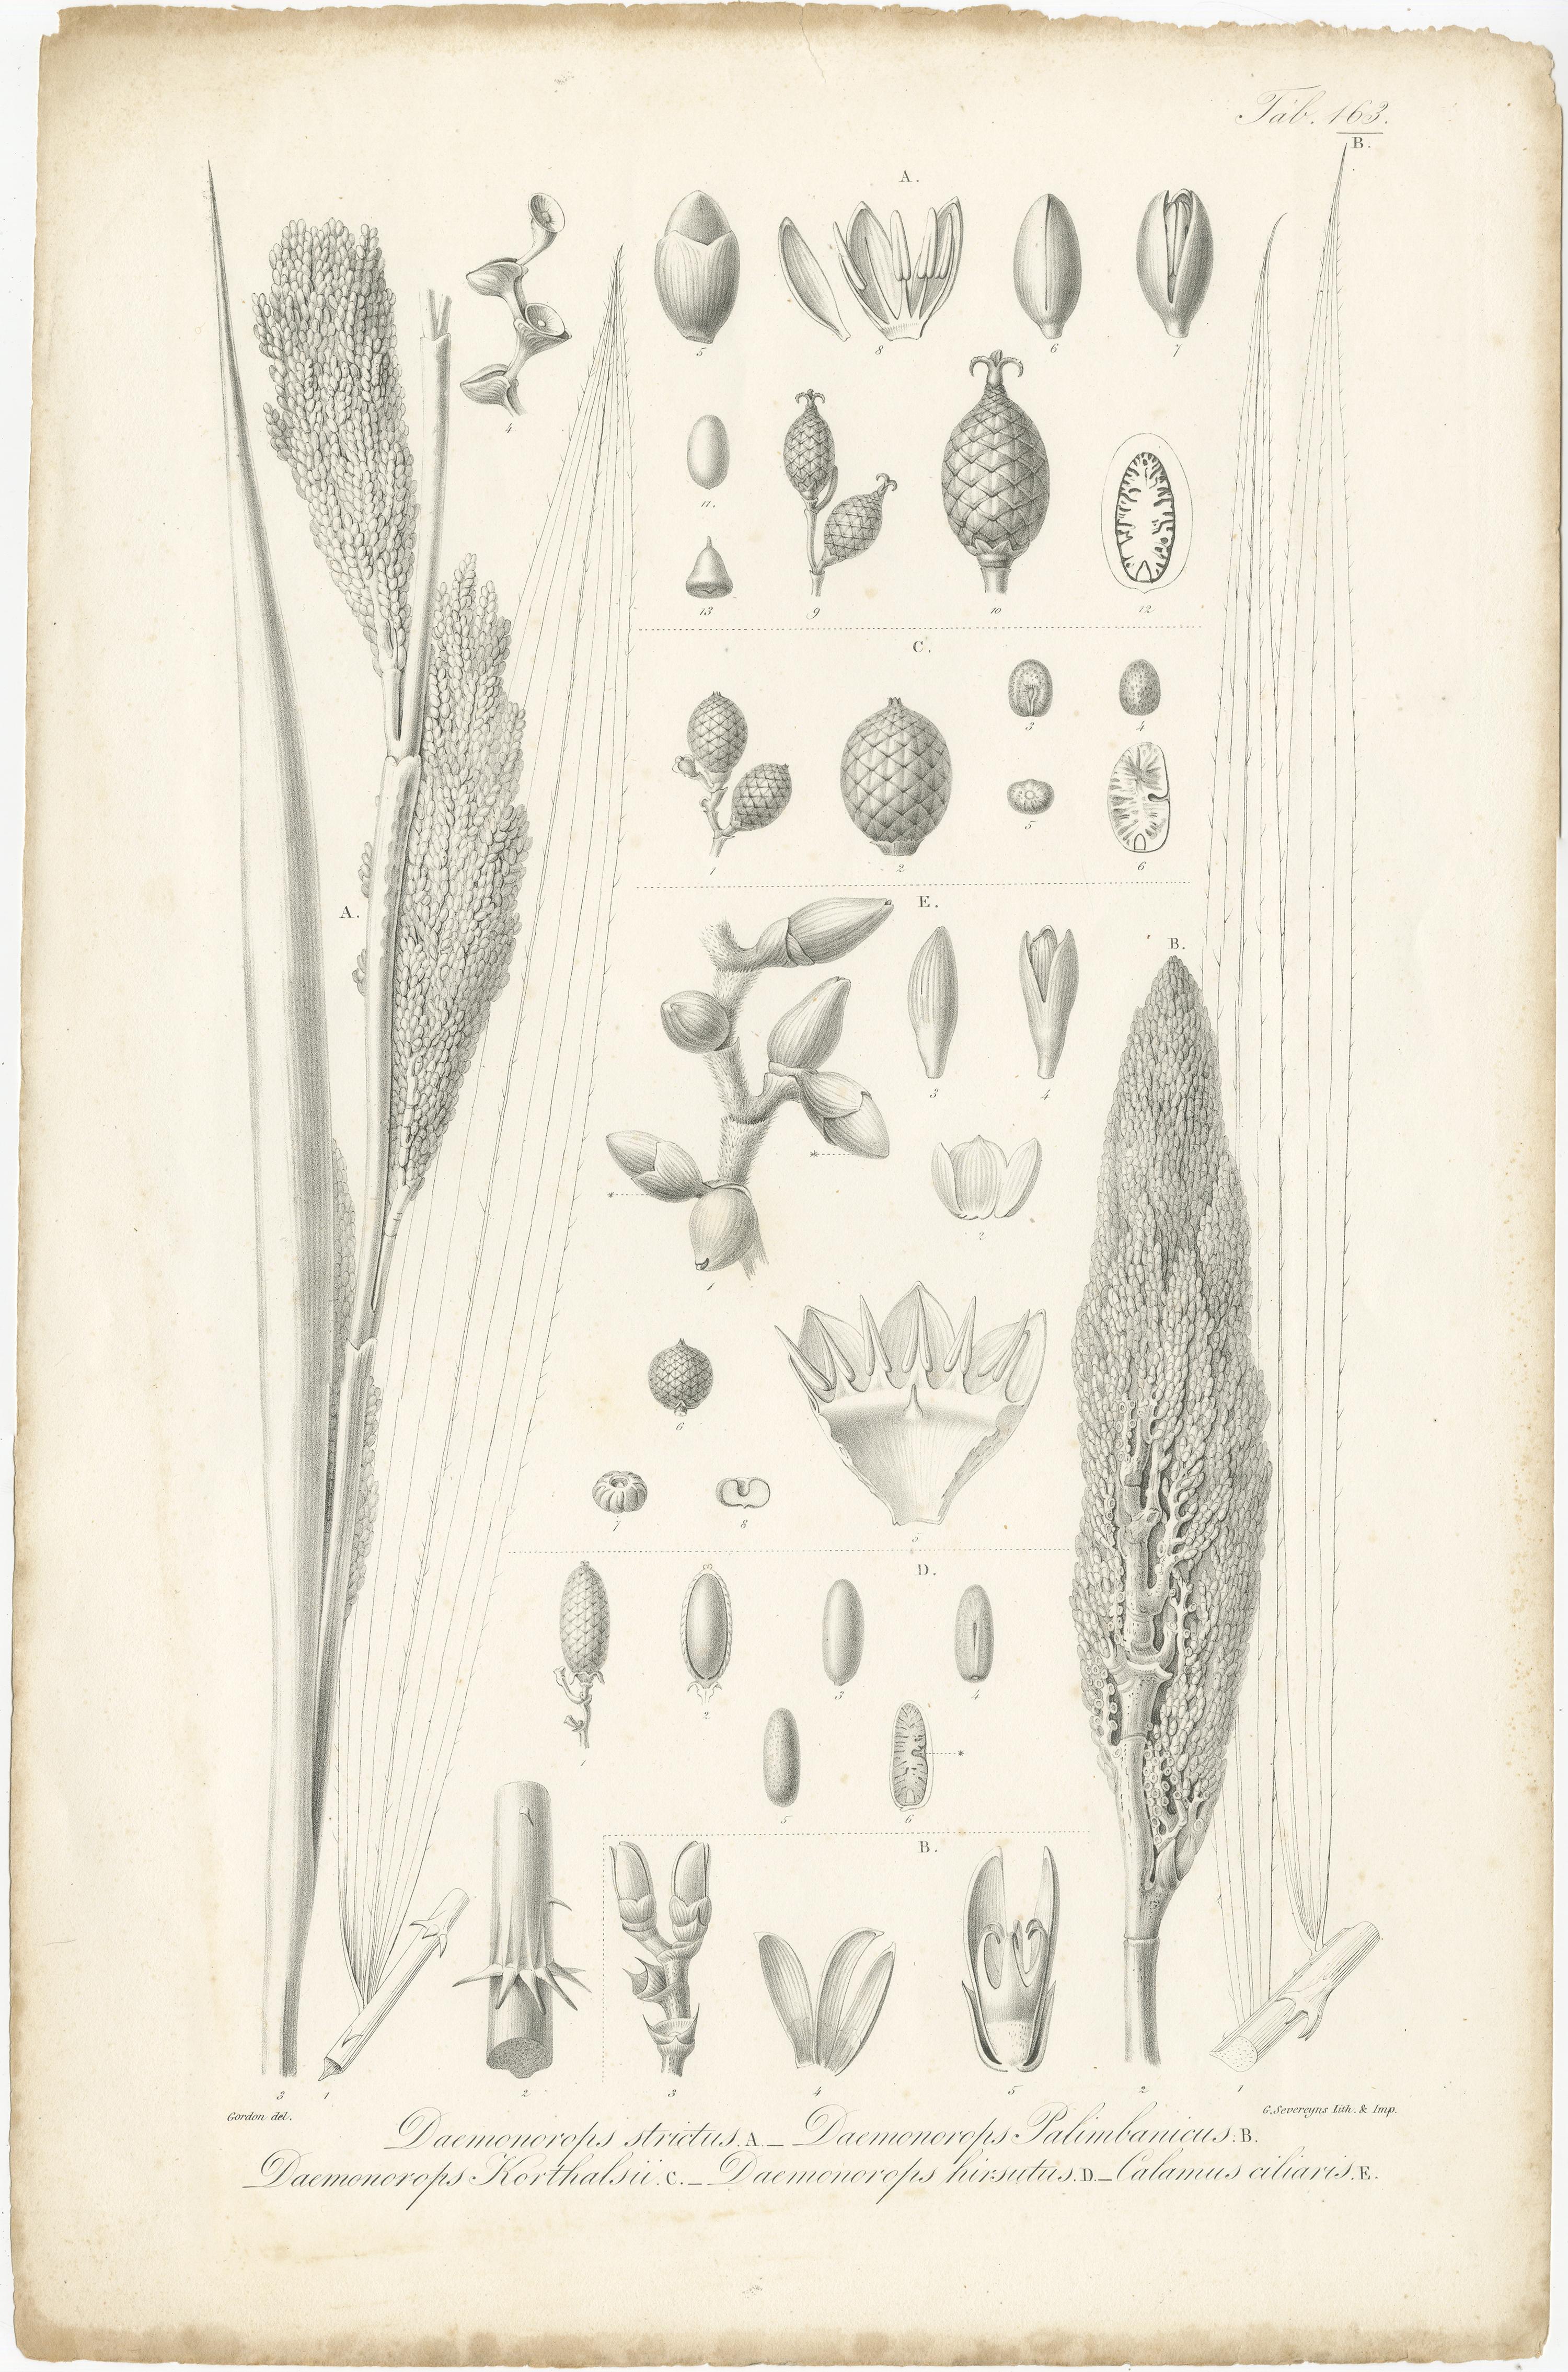 Set of two antique prints:
1) Korthalsia debilis, Korthalsia robusta (flowering plants in the palm family)
2) Daemonorops strictus, Daemonorops Palimbanicus etc. (palm species)
These prints originate from 'Rumphia' by C.L. Blume, published between